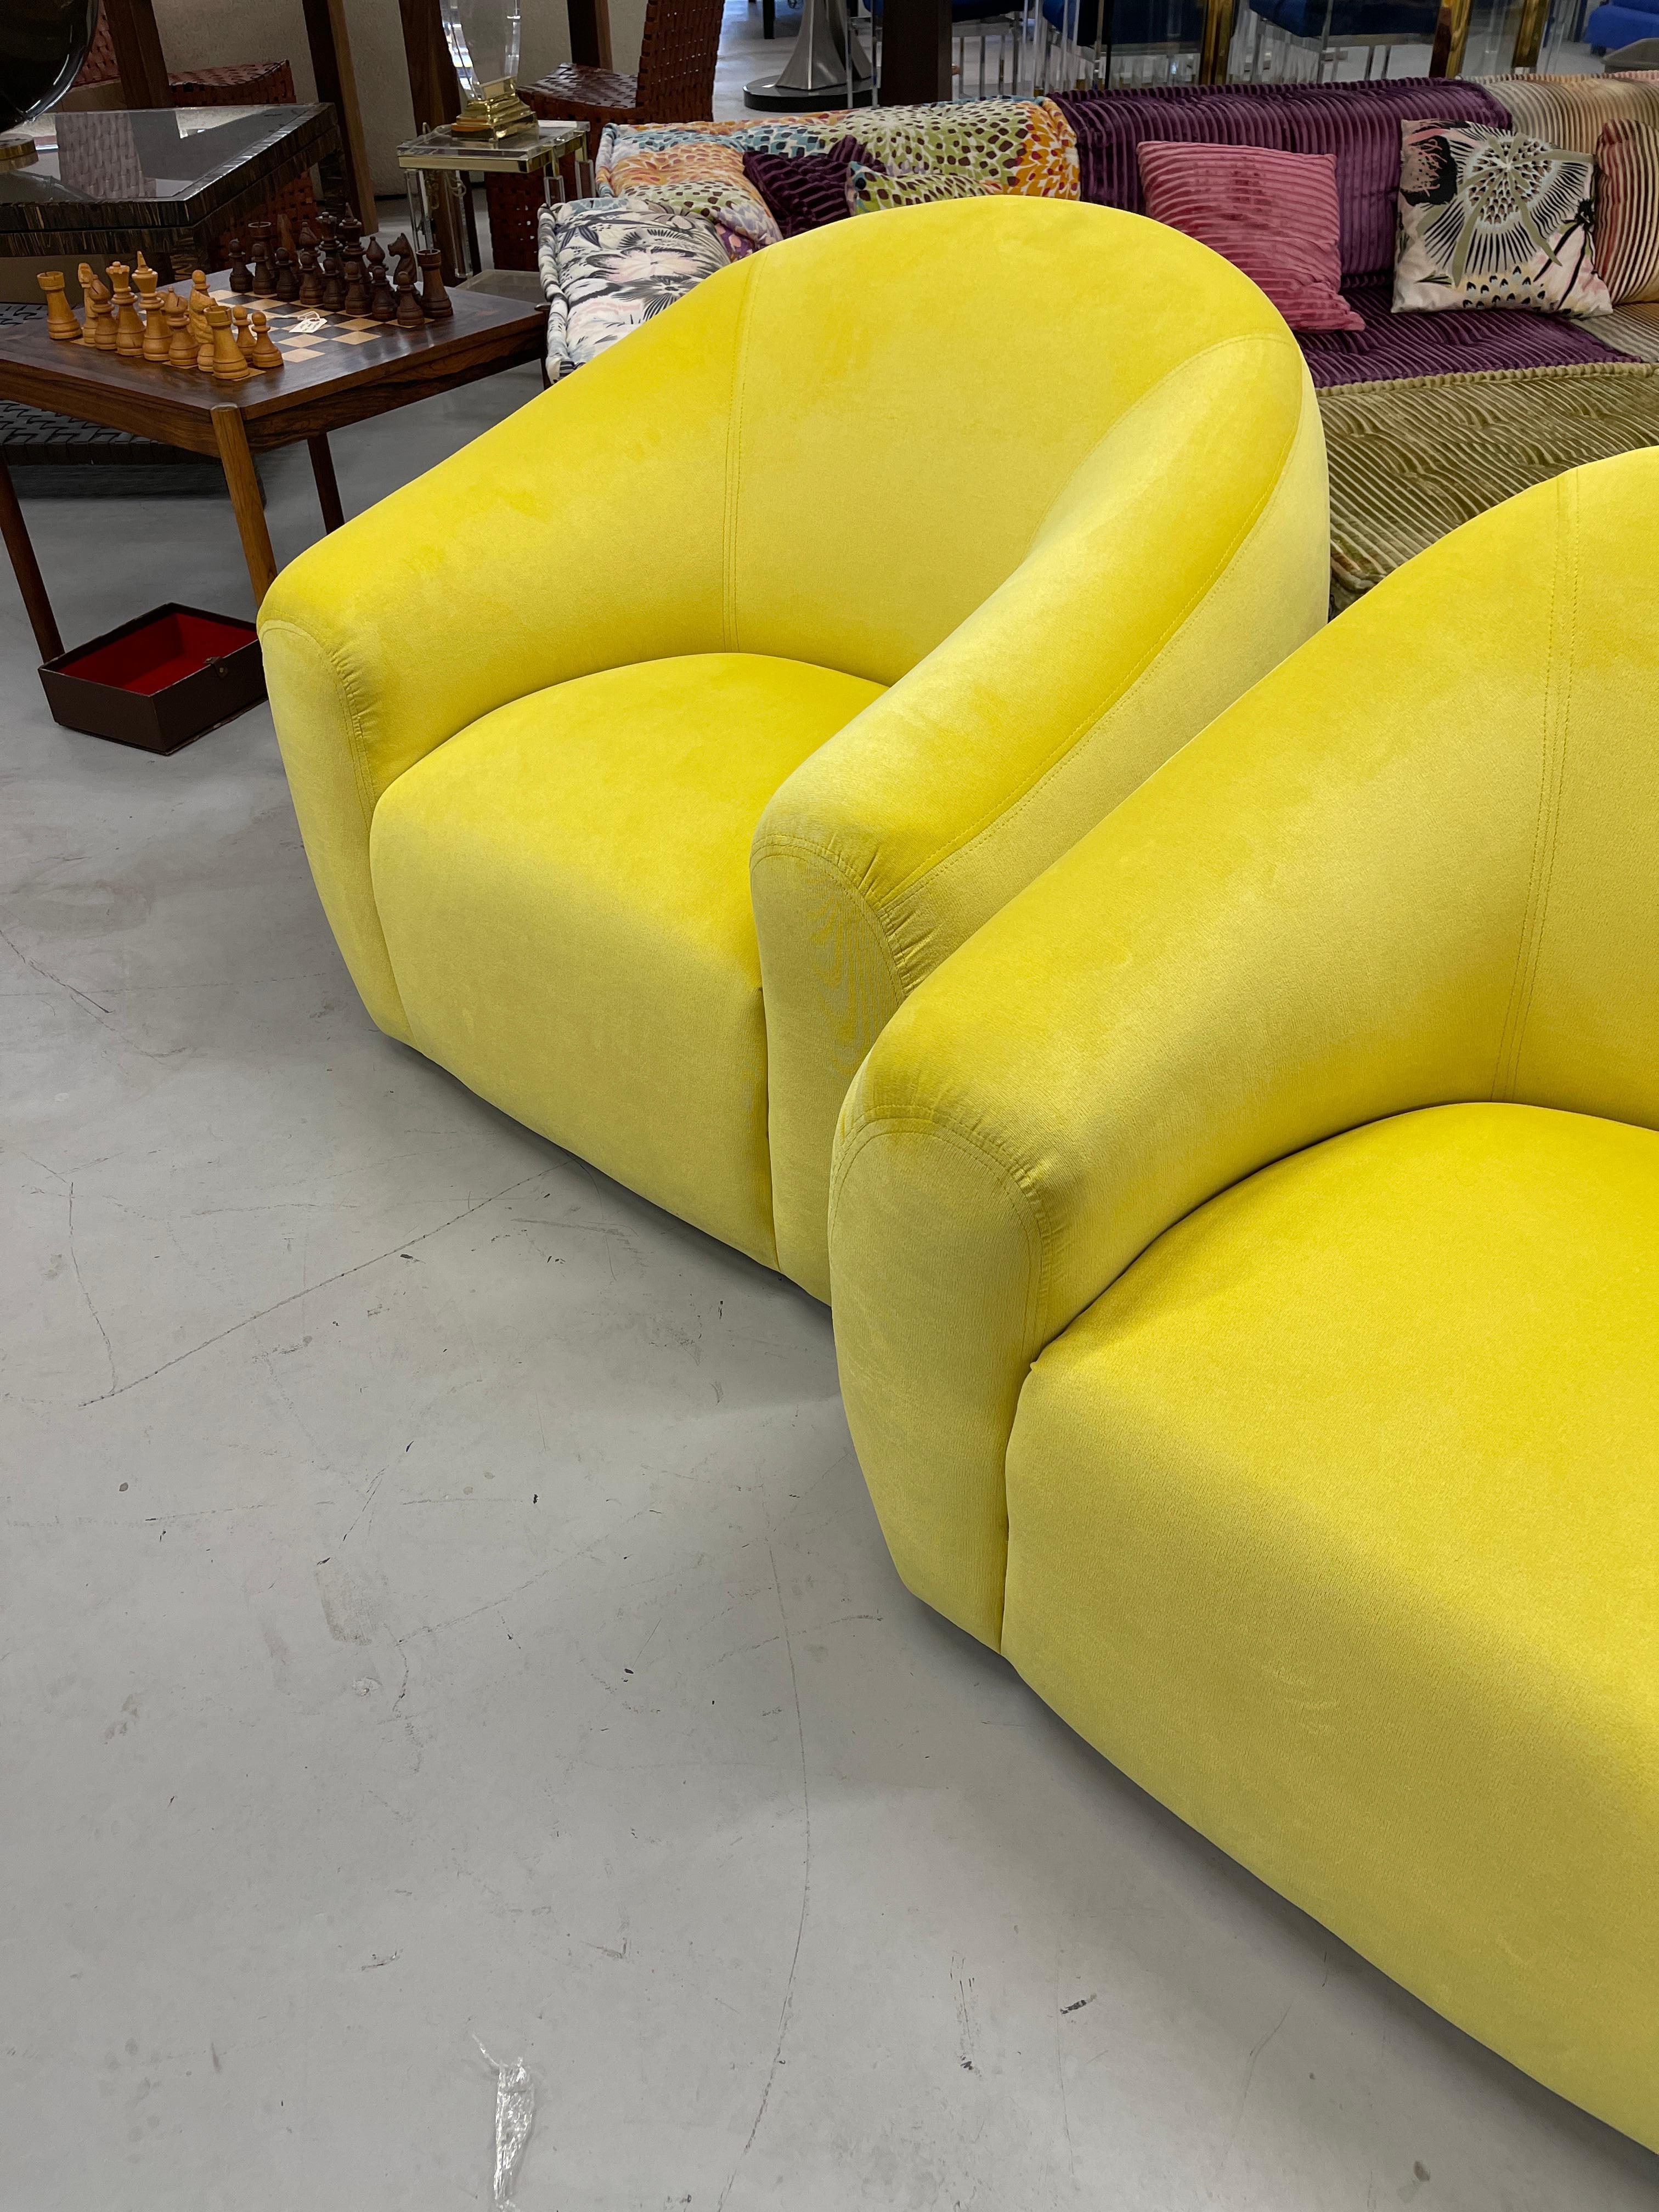 Late 20th Century A Rudin Swivel Chairs in Limon Kravet Fabric